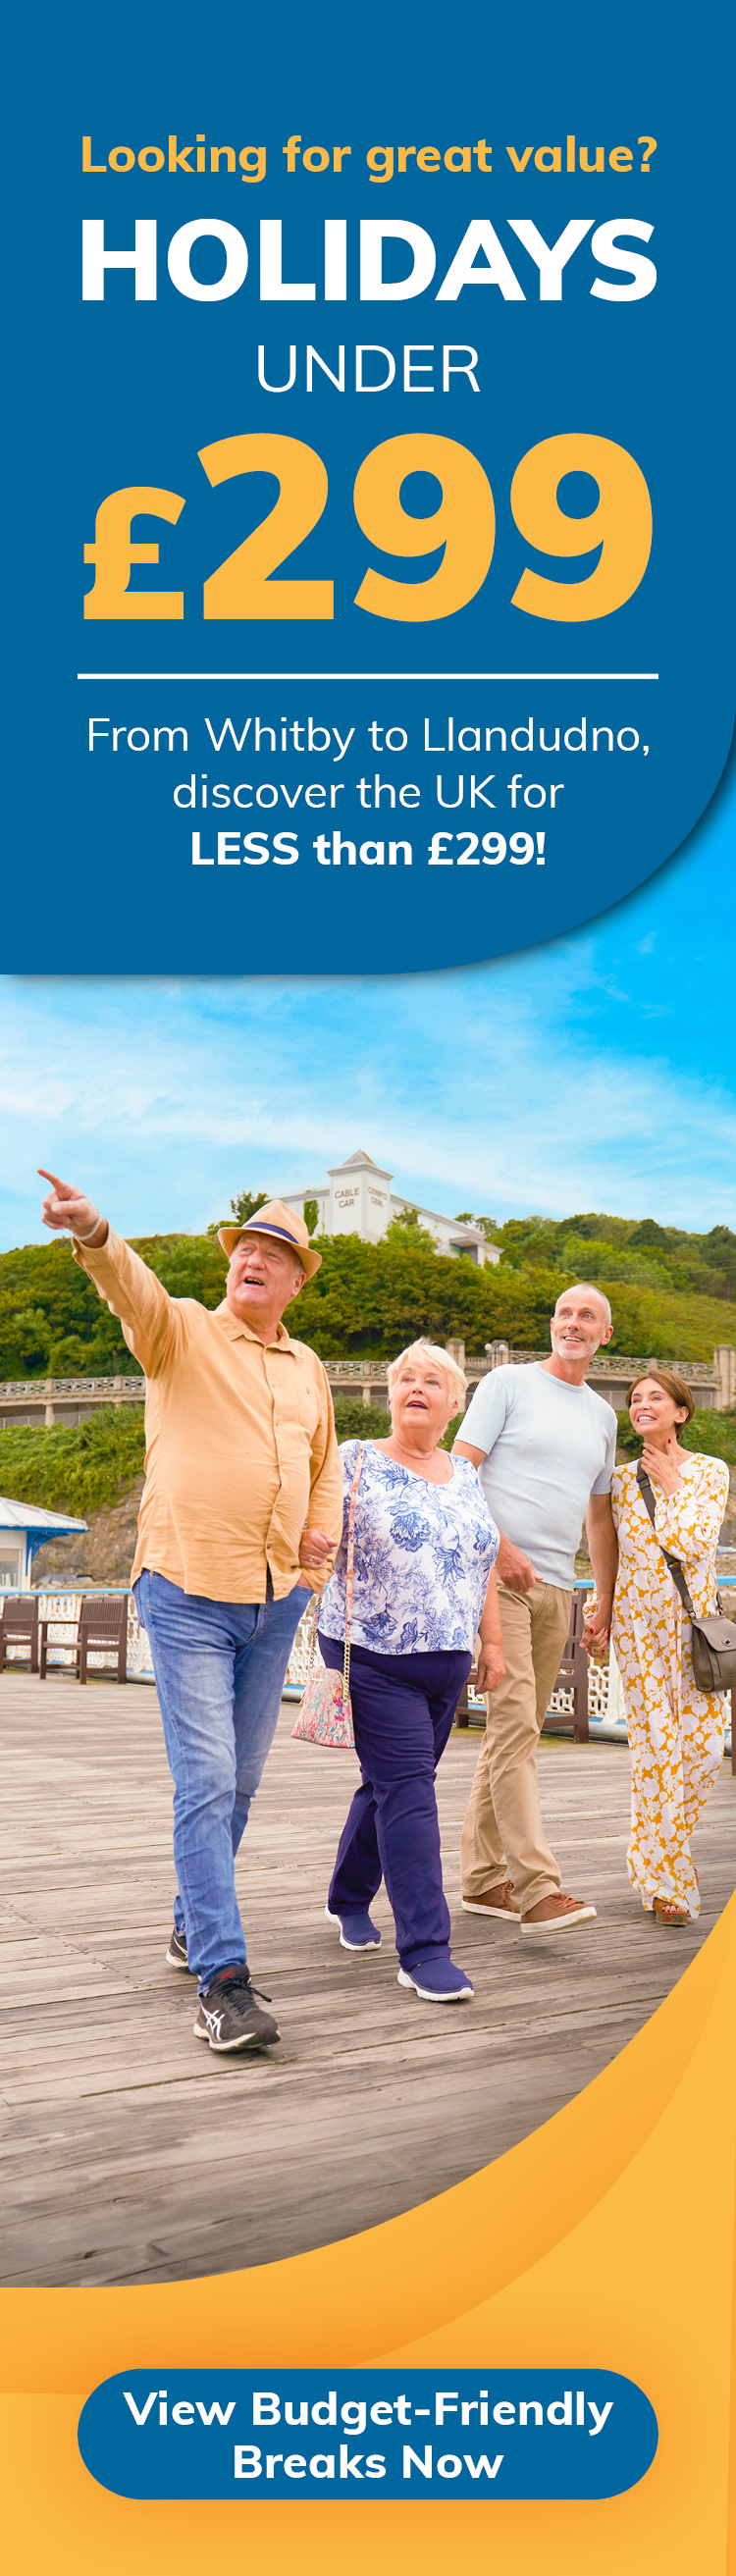 Looking for great value? Holidays under £299. From Whitby to Llandudno, discover the less than £299! - View budget-friendly breaks now